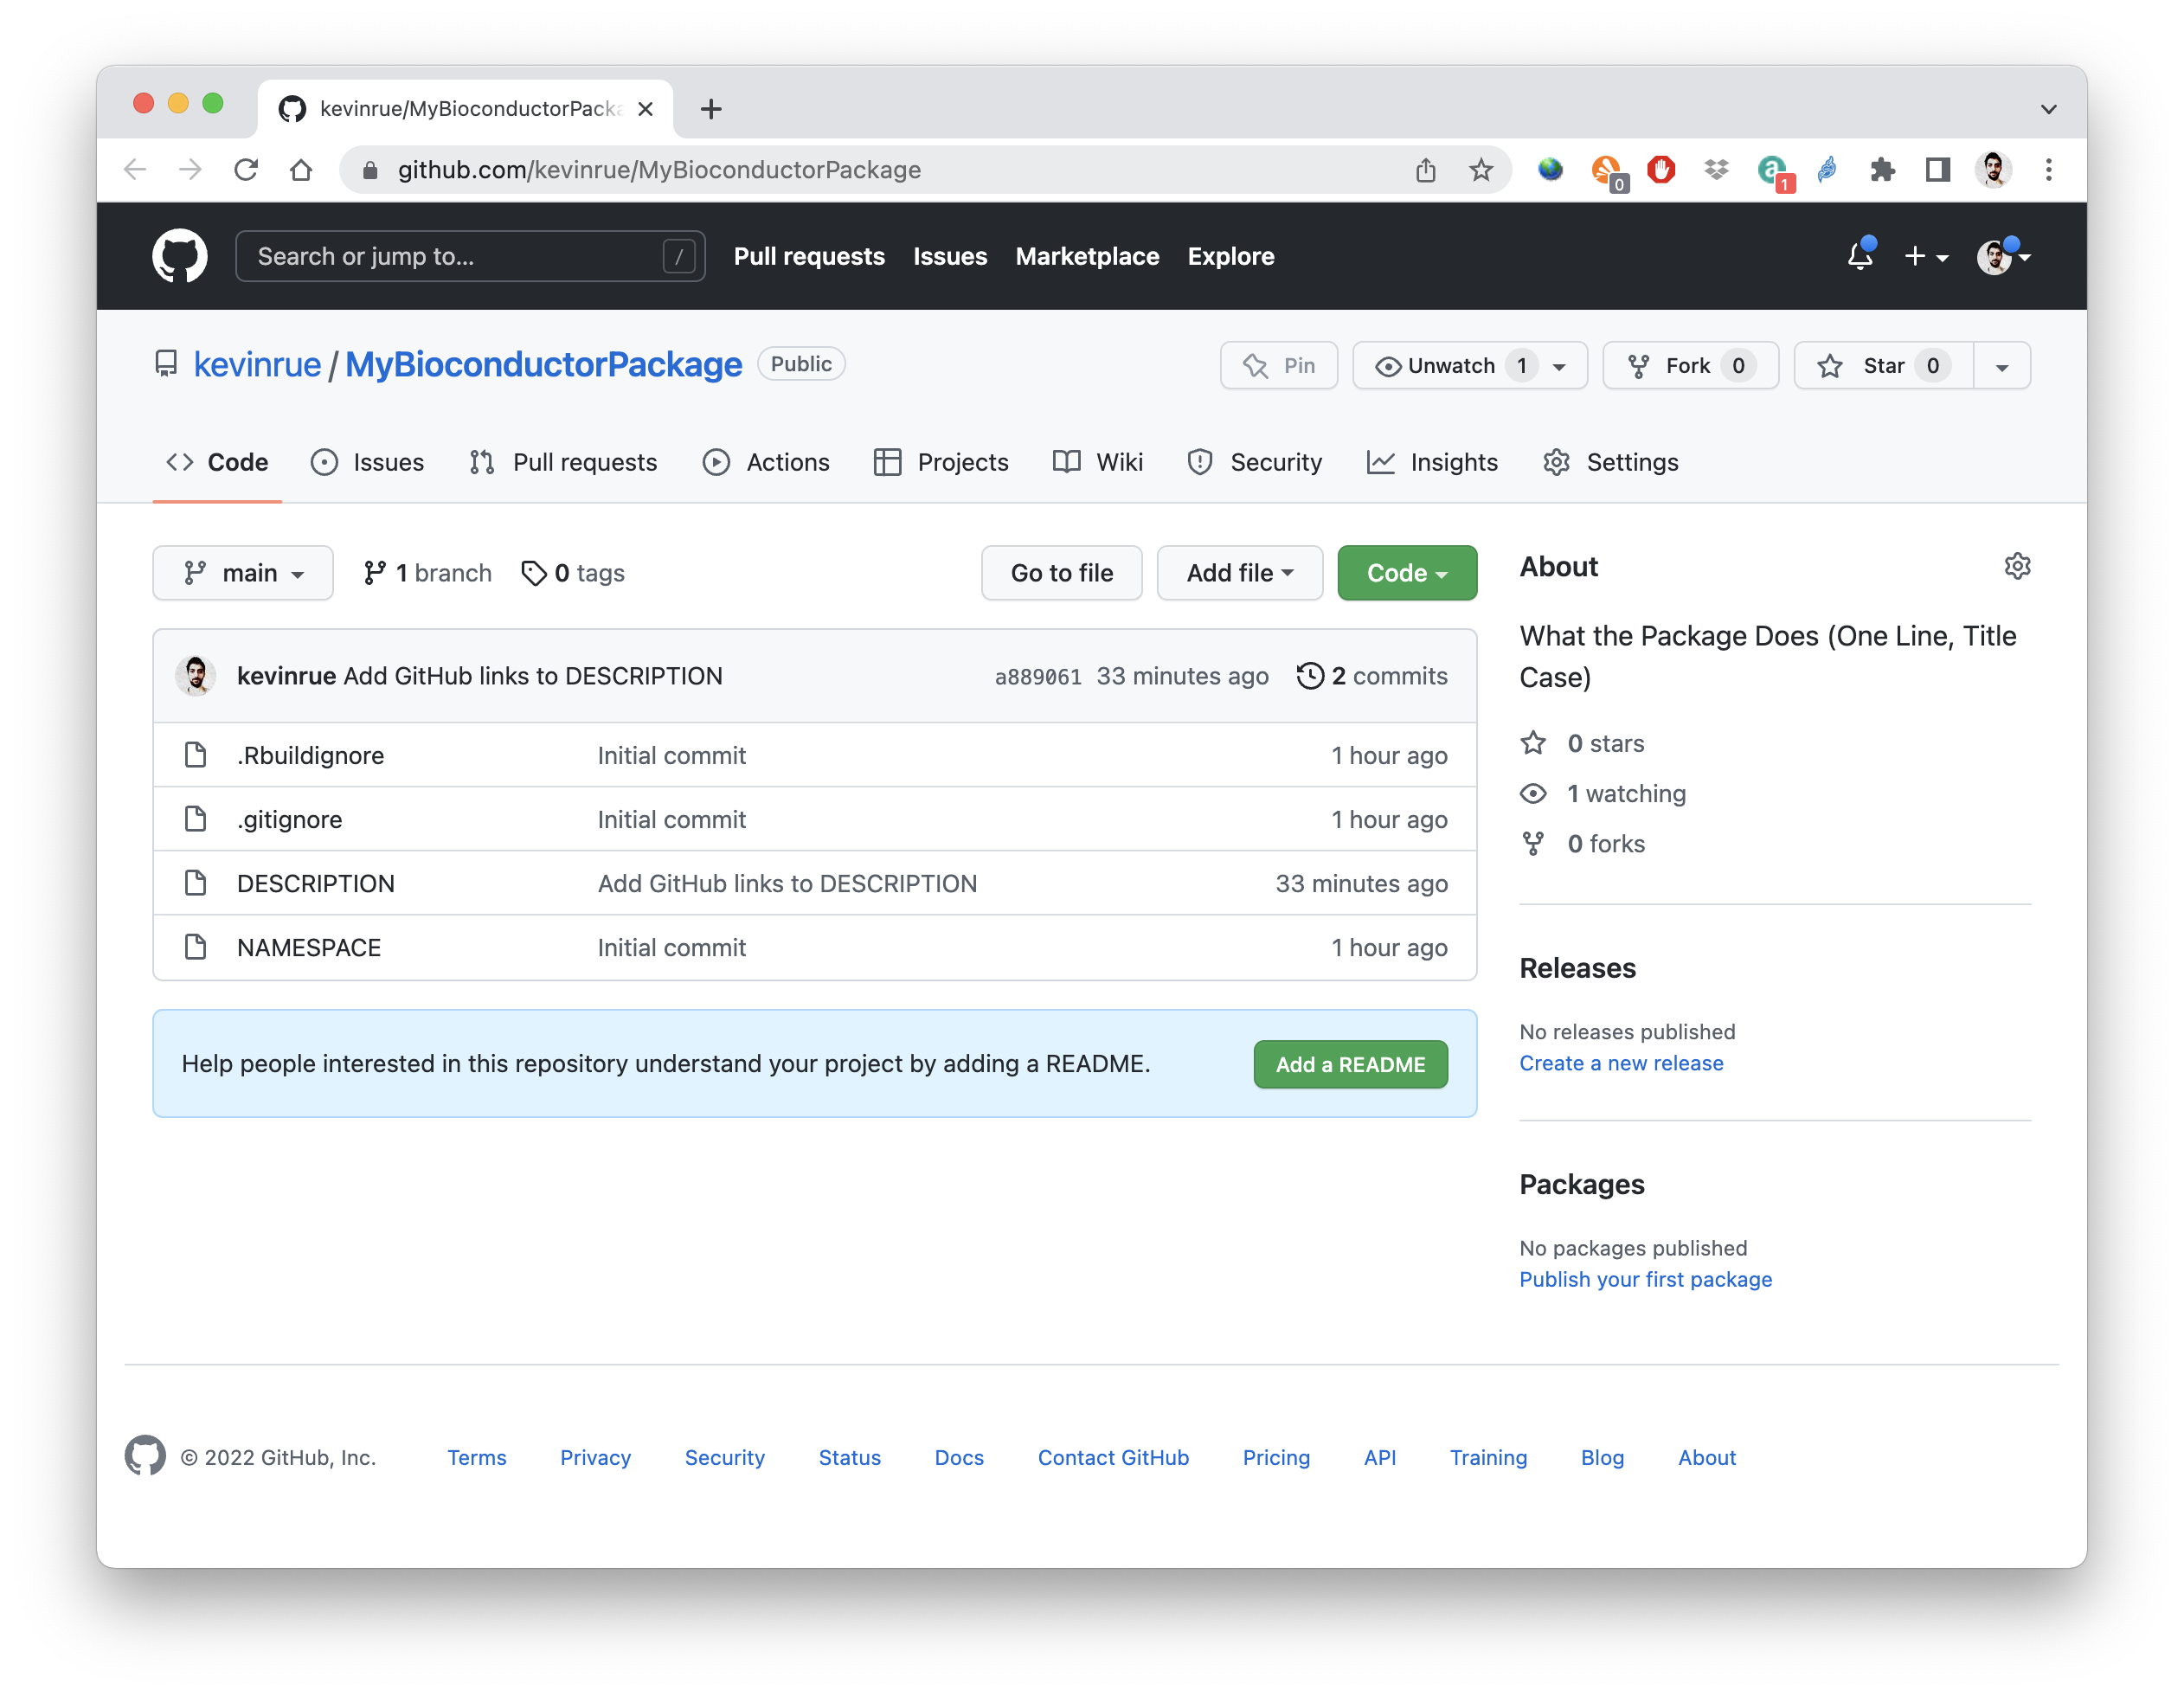 Landing page of the GitHub repository.